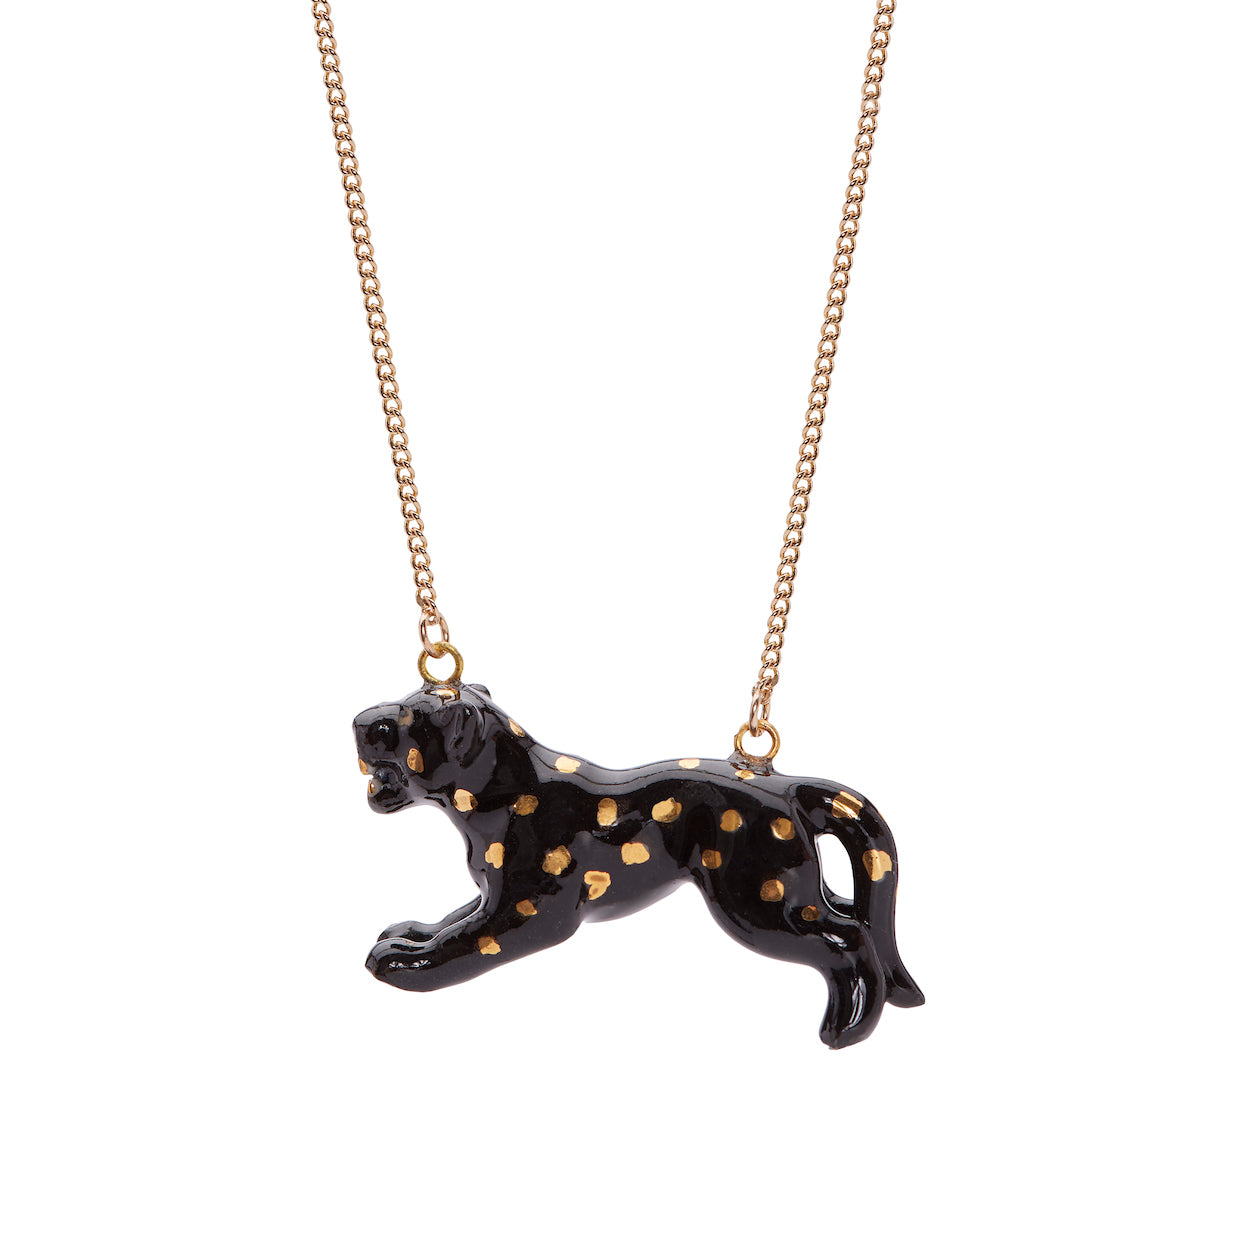 Leaping Panther Necklace